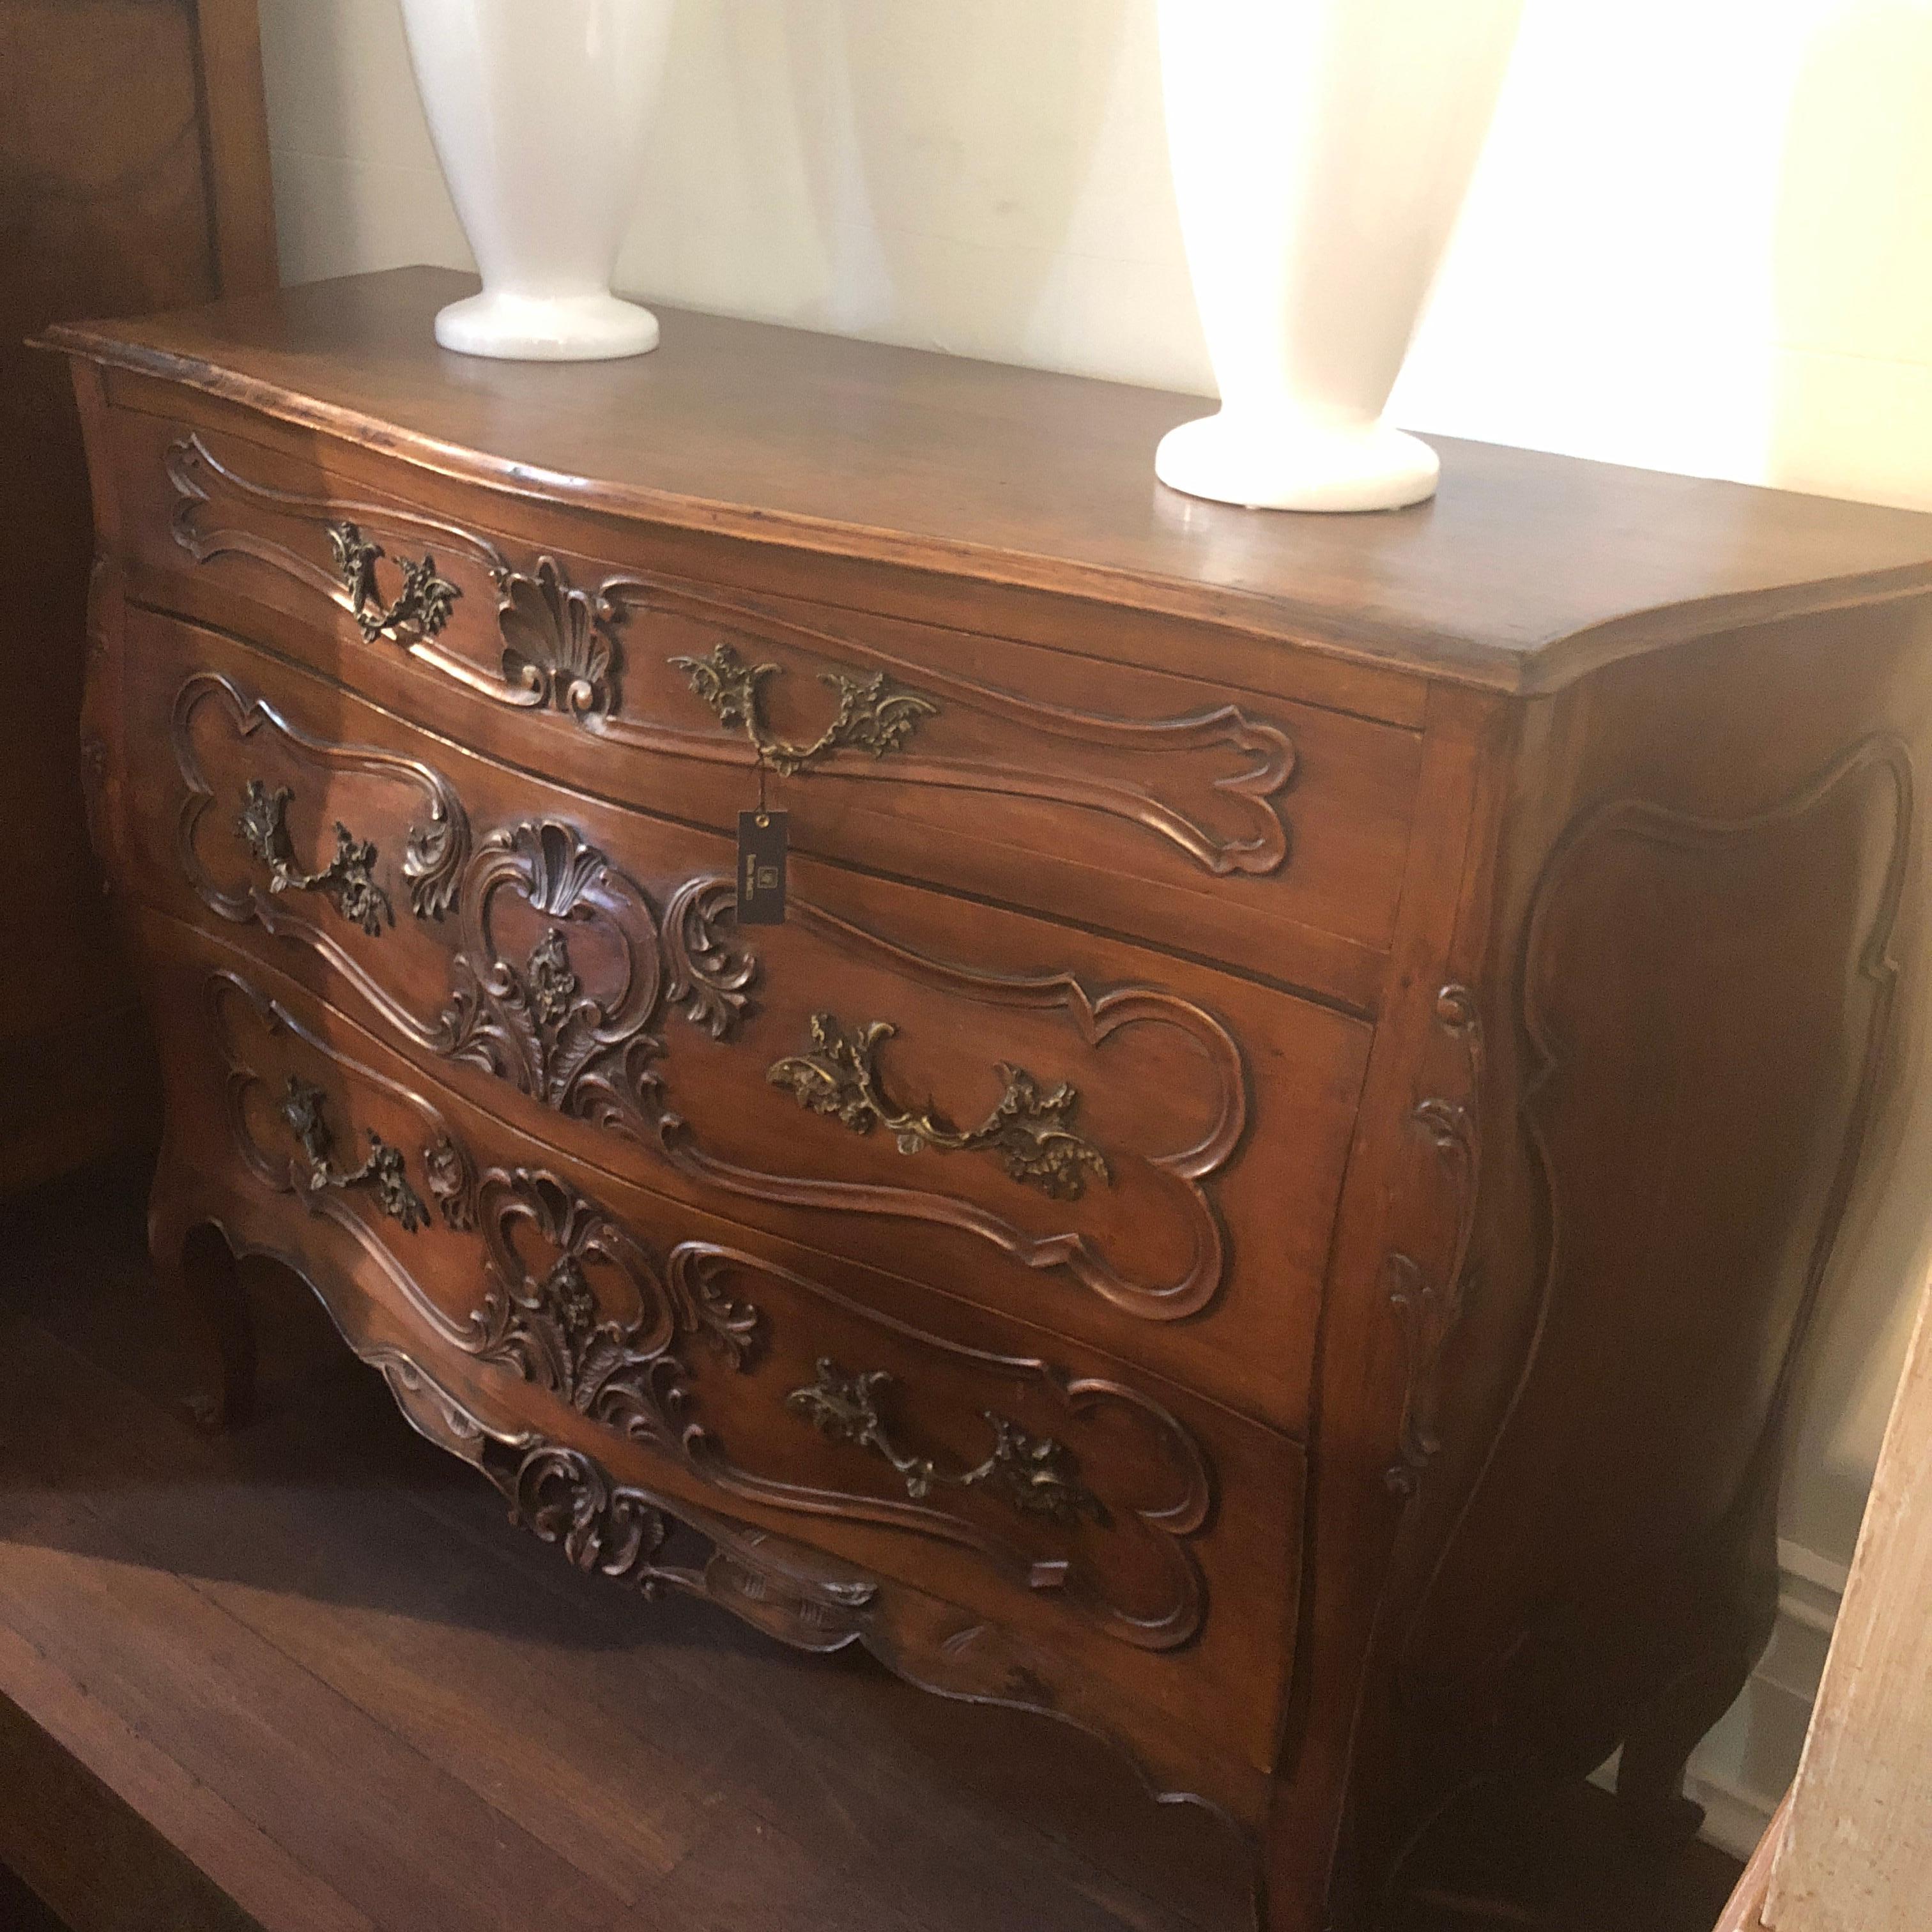 Stunning, ornate Louis XV carvings adorn this beautiful walnut commode, accompanied with cabriole legs and the classical, 'bombe' shape. The original brass French lock remains with this piece along with ornate brass drawer pulls. This rich walnut